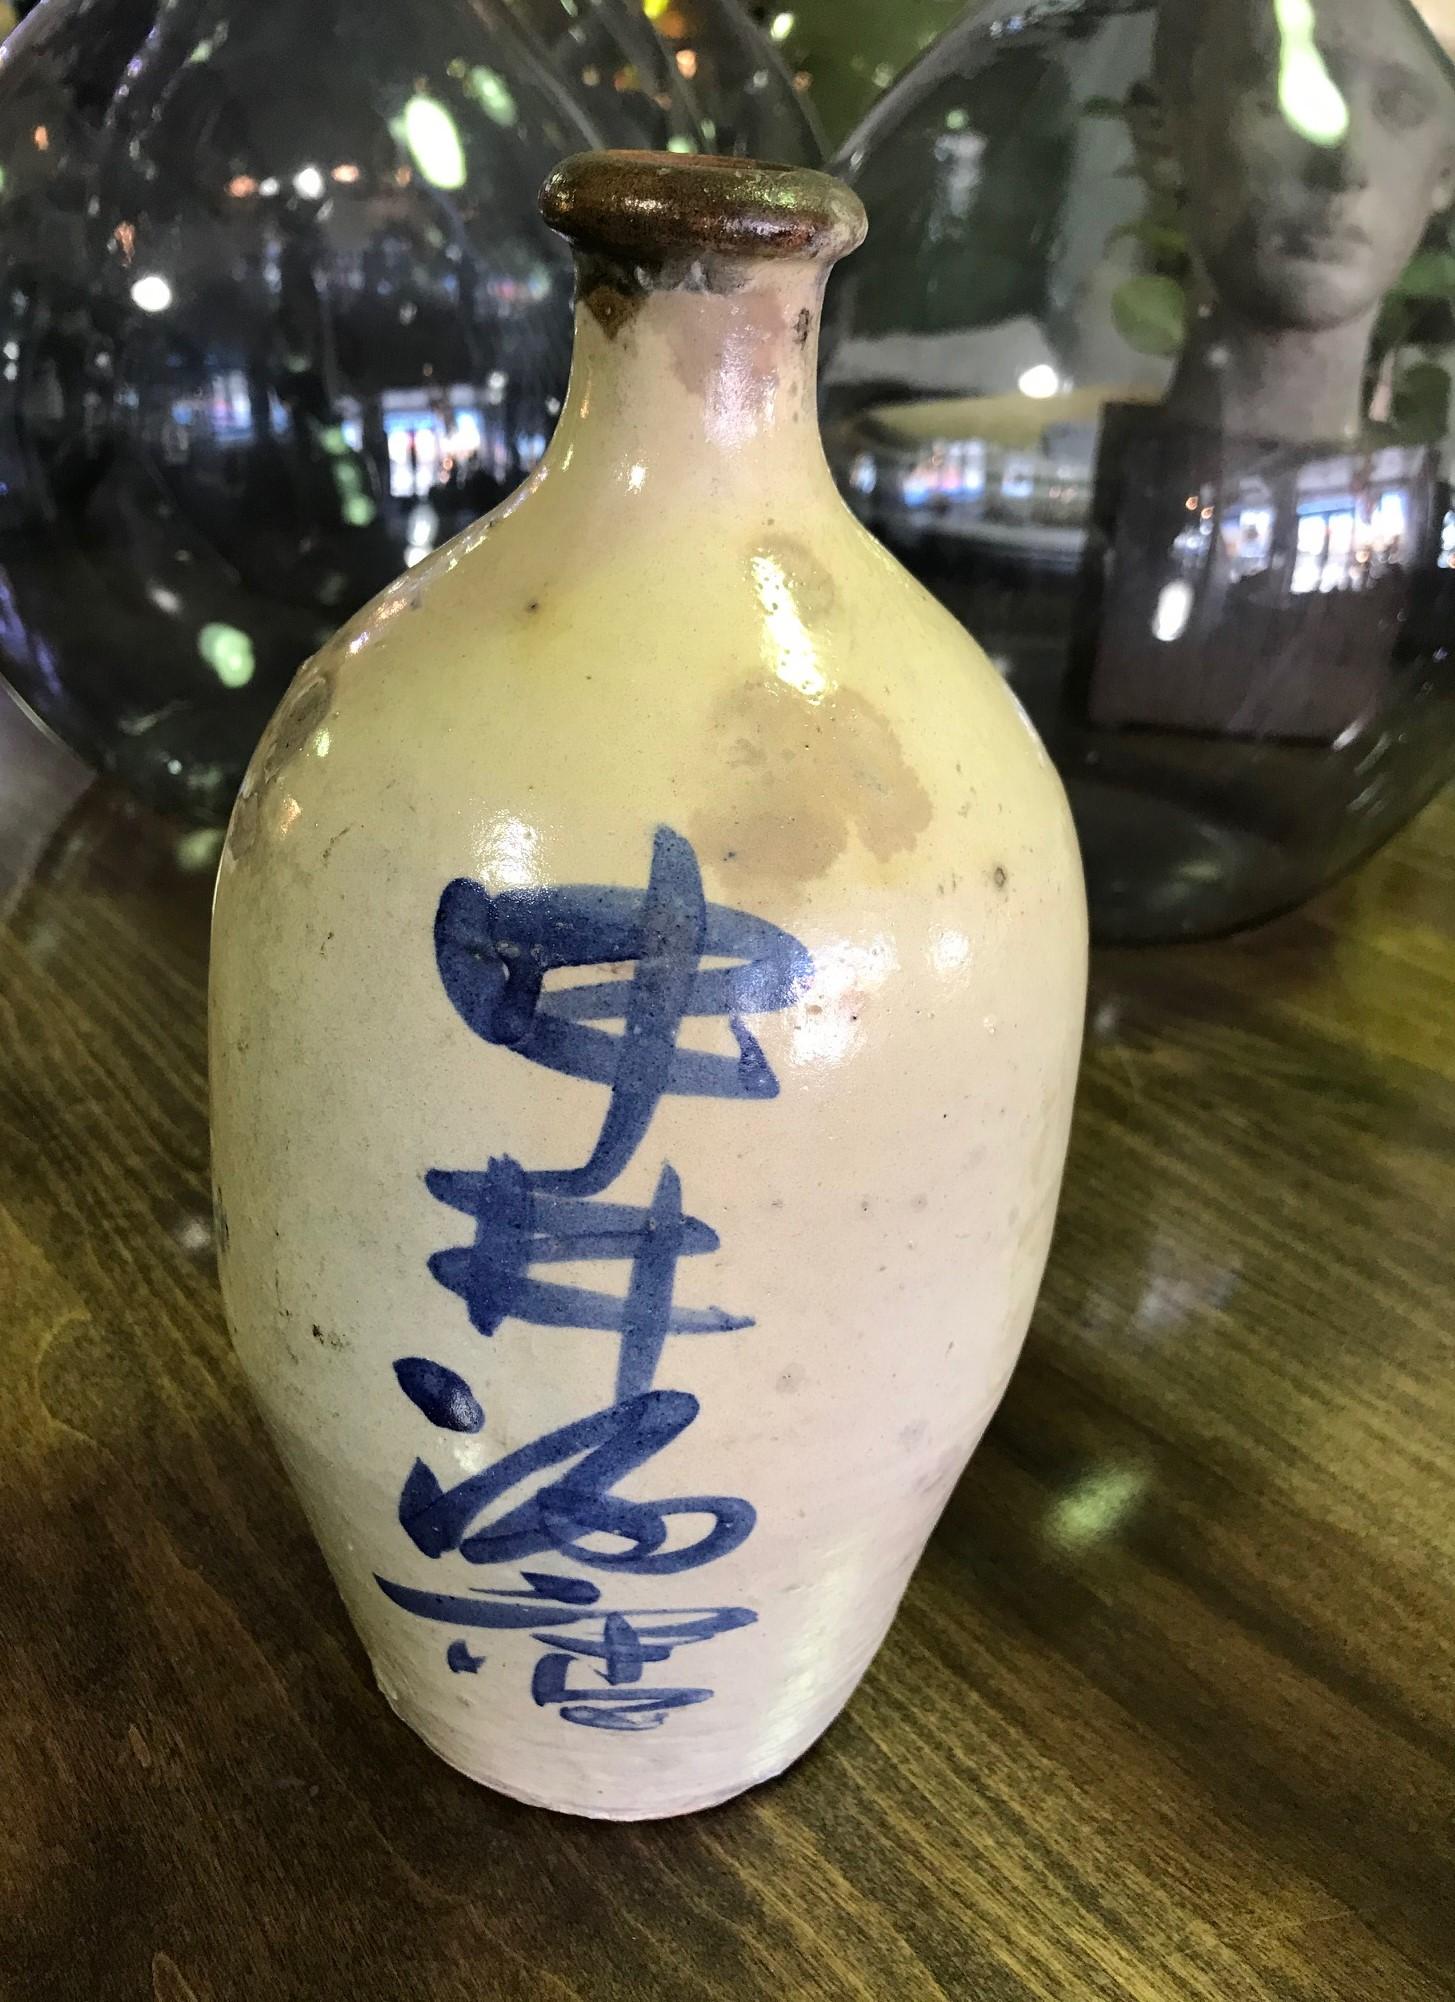 A very eye-catching and wonderfully colored and textured piece.

Freely hand painted with calligraphy/ Kanji characters and beautifully glazed.

Would be a nice addition to any Japanese ceramic collection and sure to stand out in about any